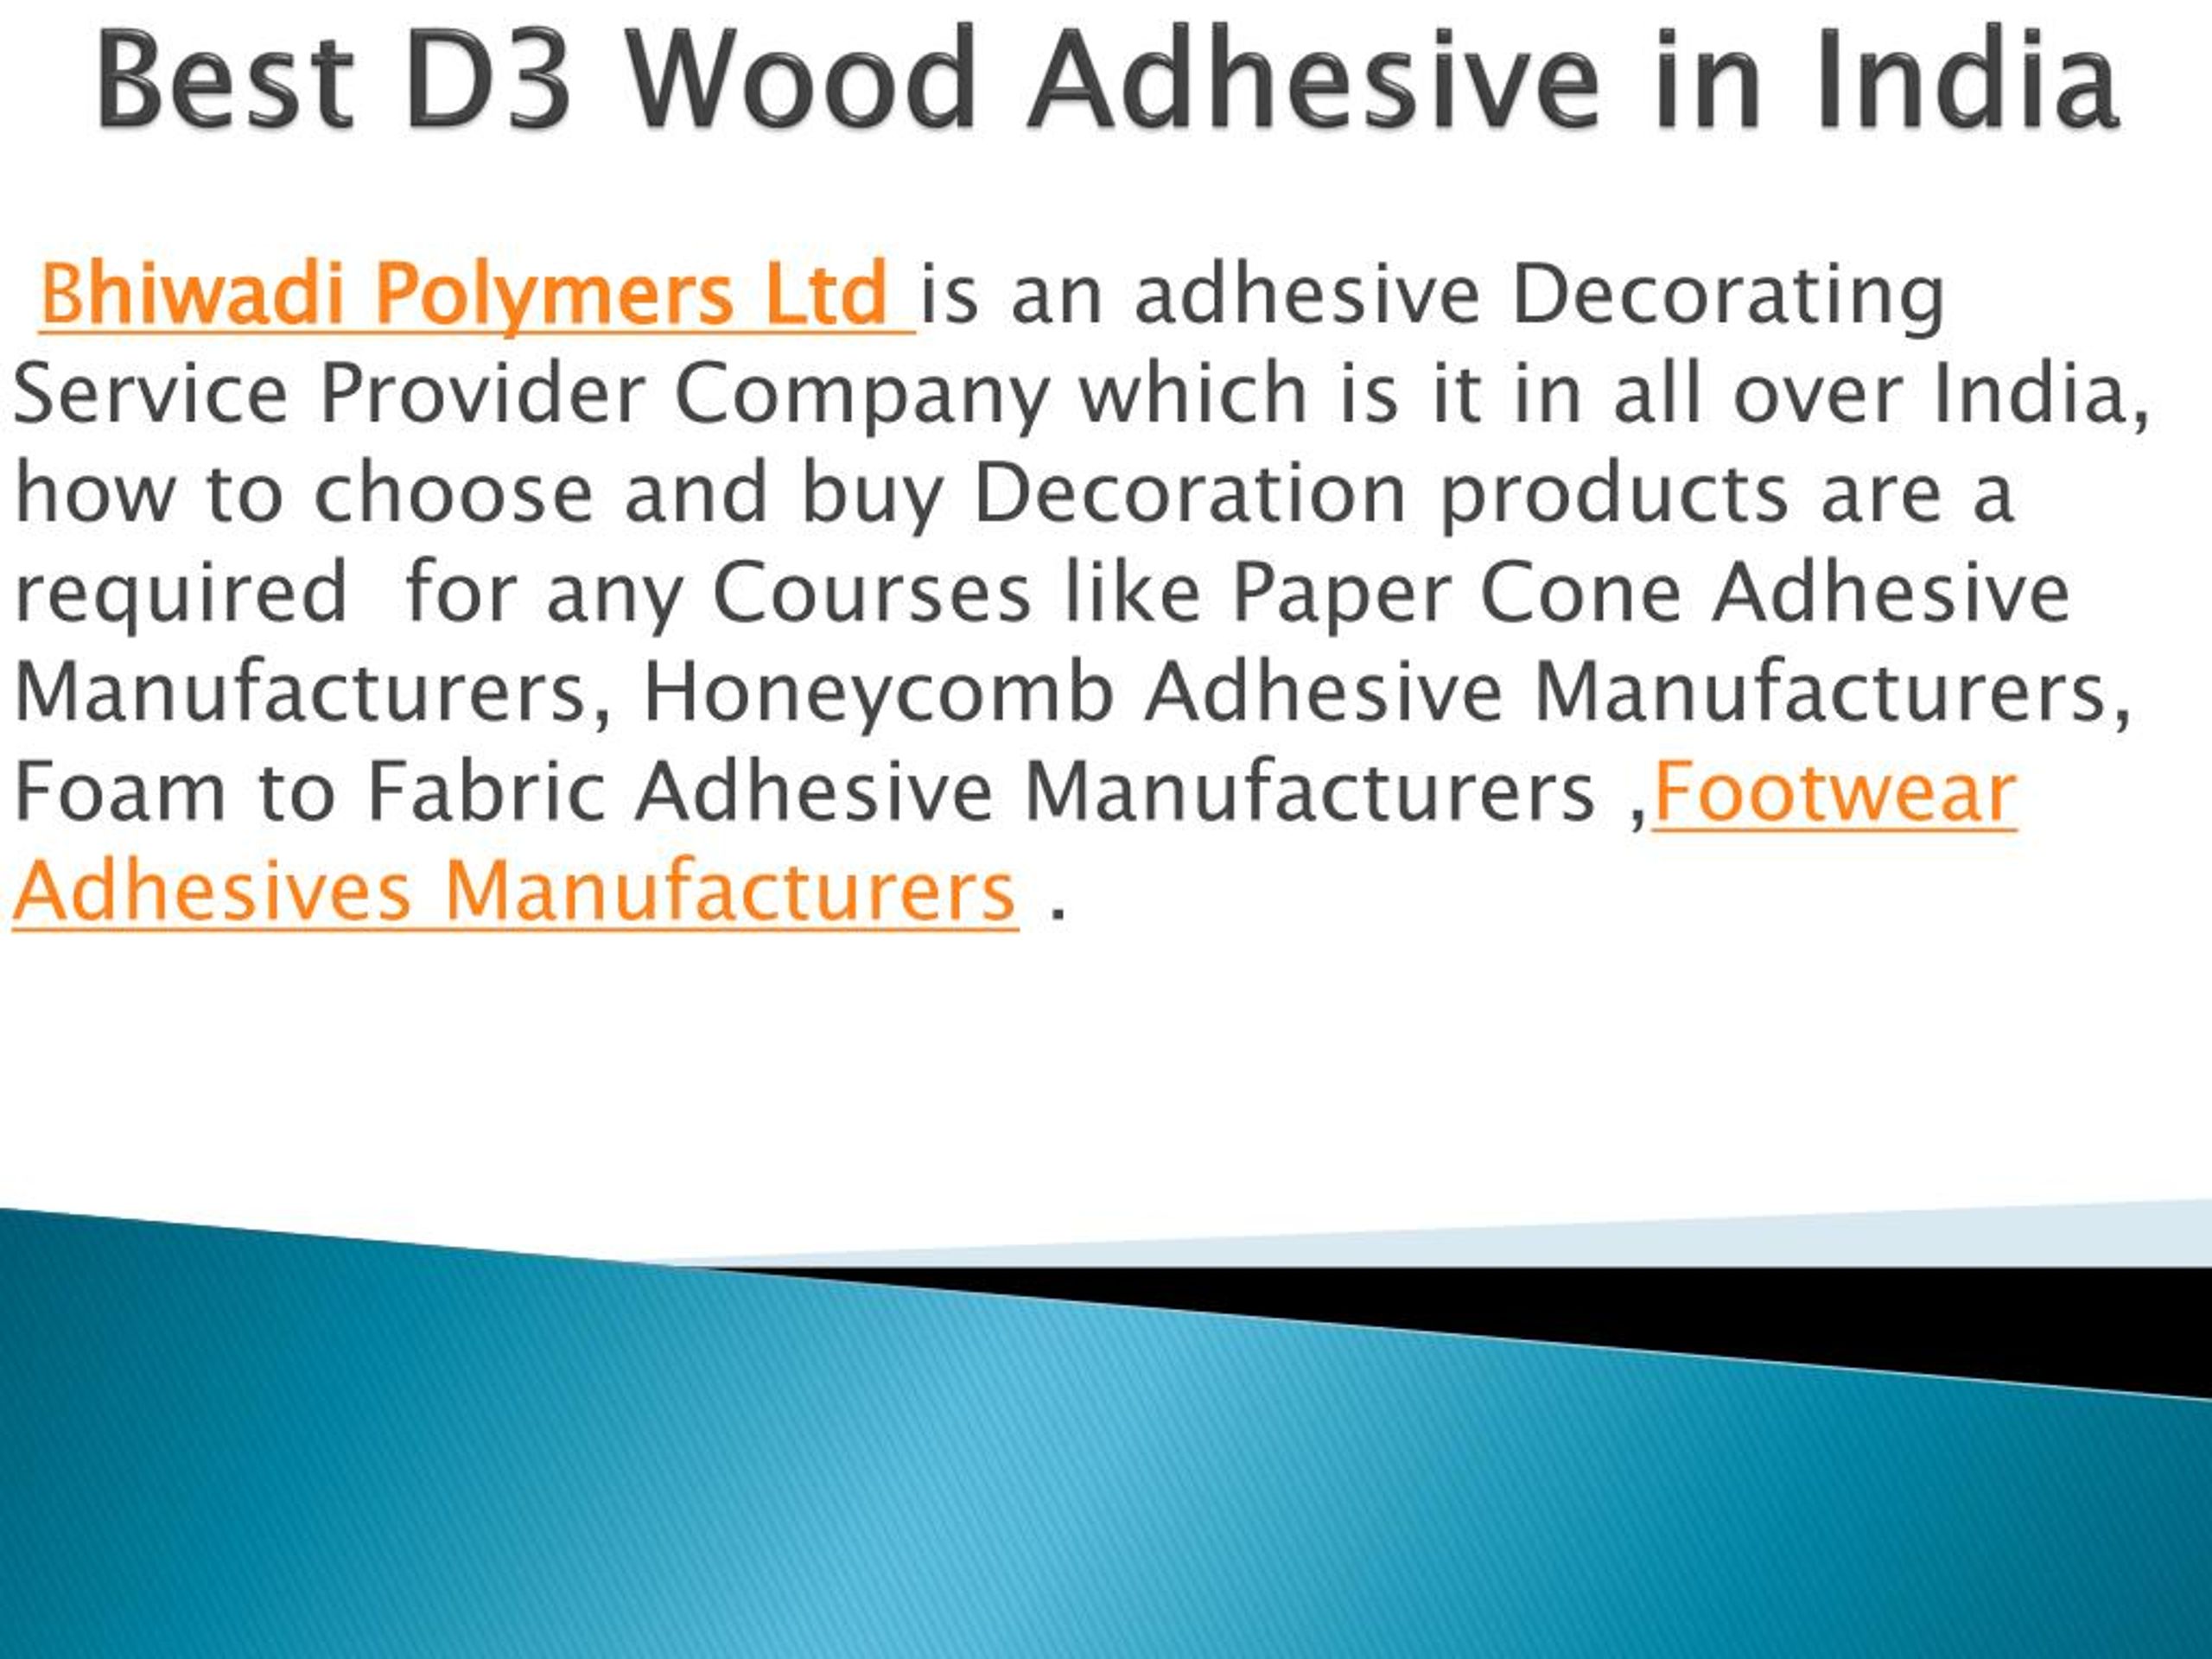 Best Wood Adhesive Manufacturing Companies in India